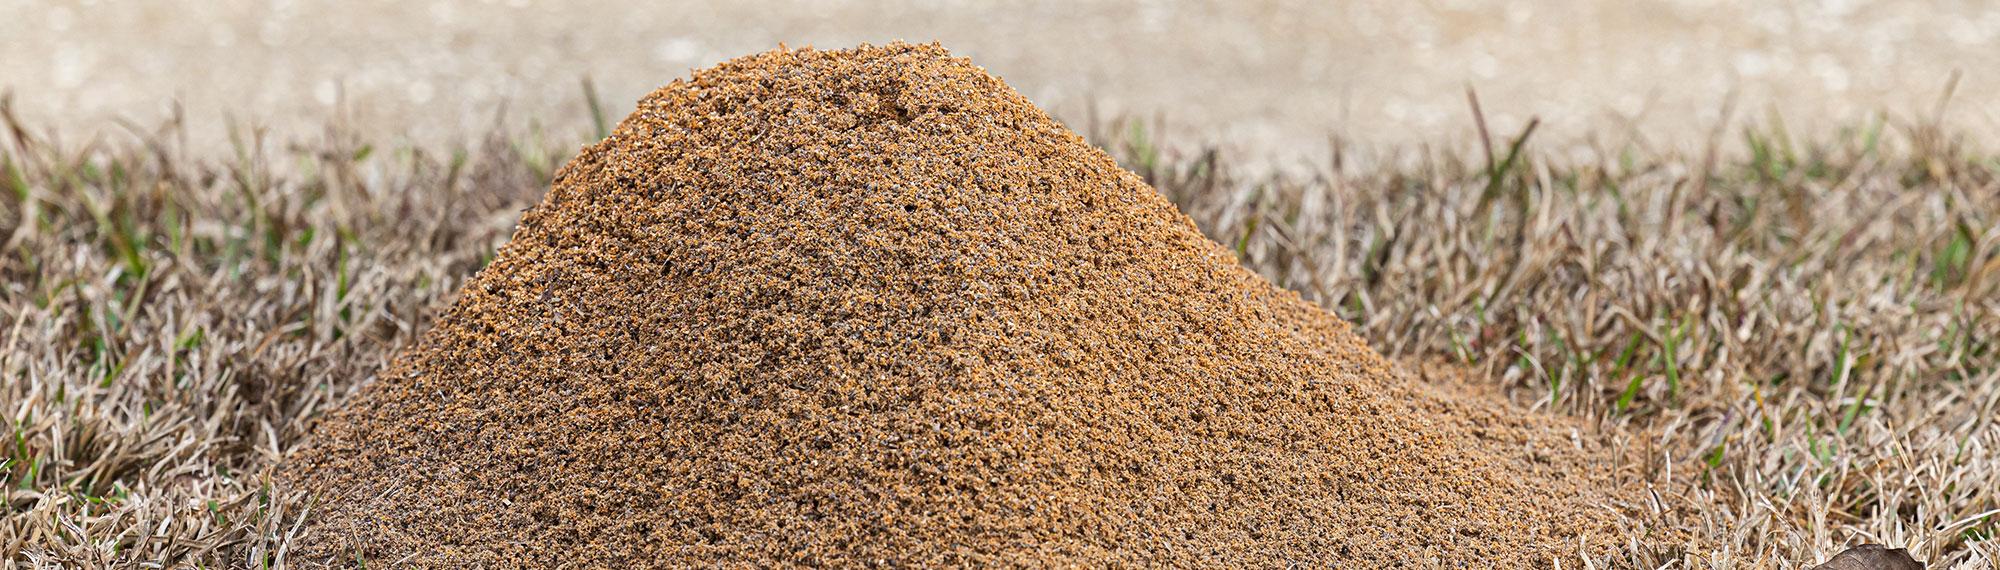 fire ant mound in florence sc yard